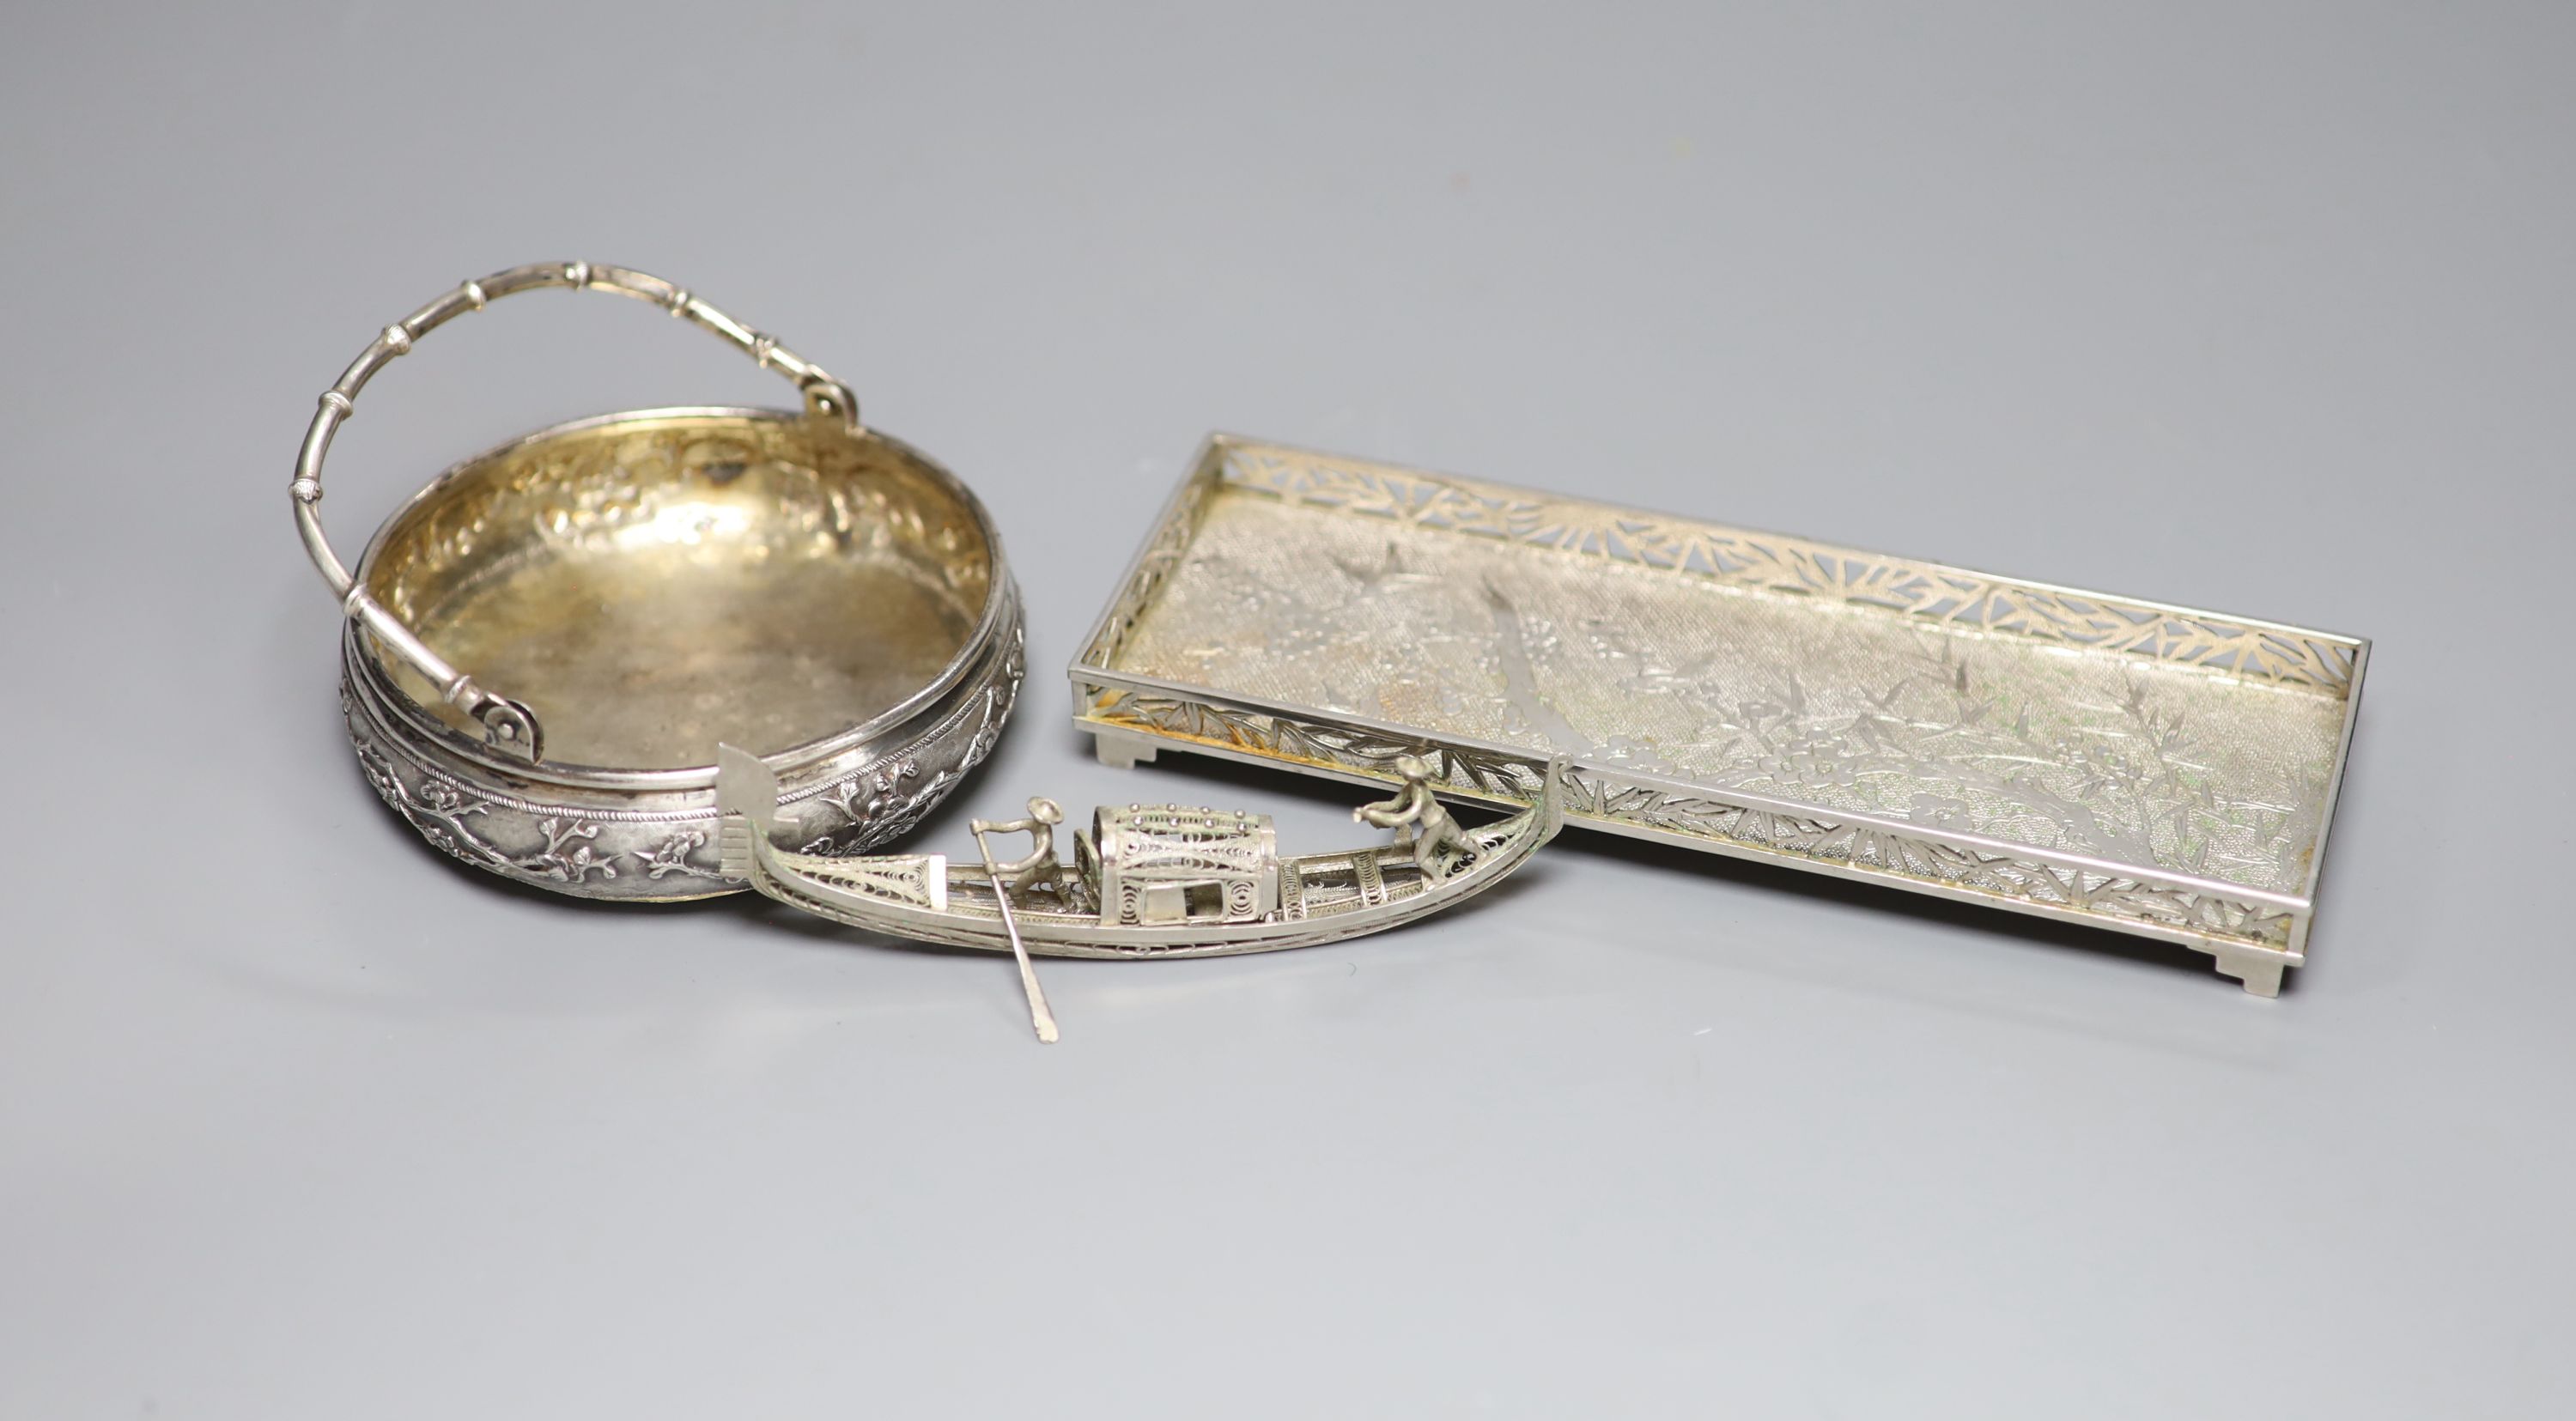 An early 20th century Chinese Export white metal rectangular tray, maker LH, 18.8cm, together with a similar bonbon basket and a small filigree junk